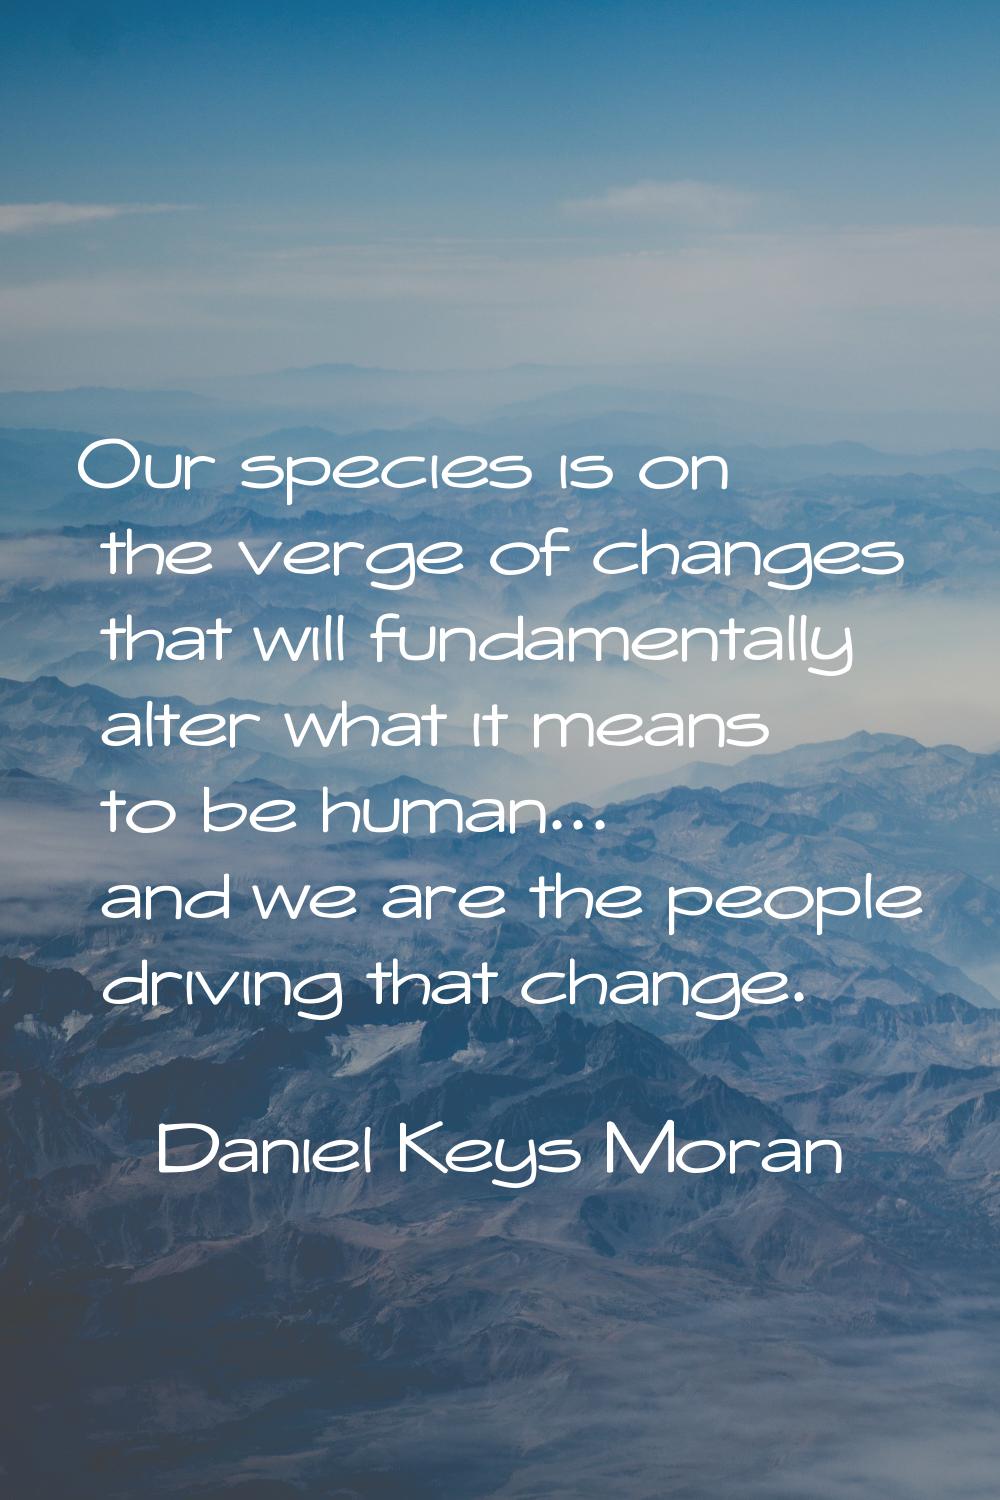 Our species is on the verge of changes that will fundamentally alter what it means to be human... a